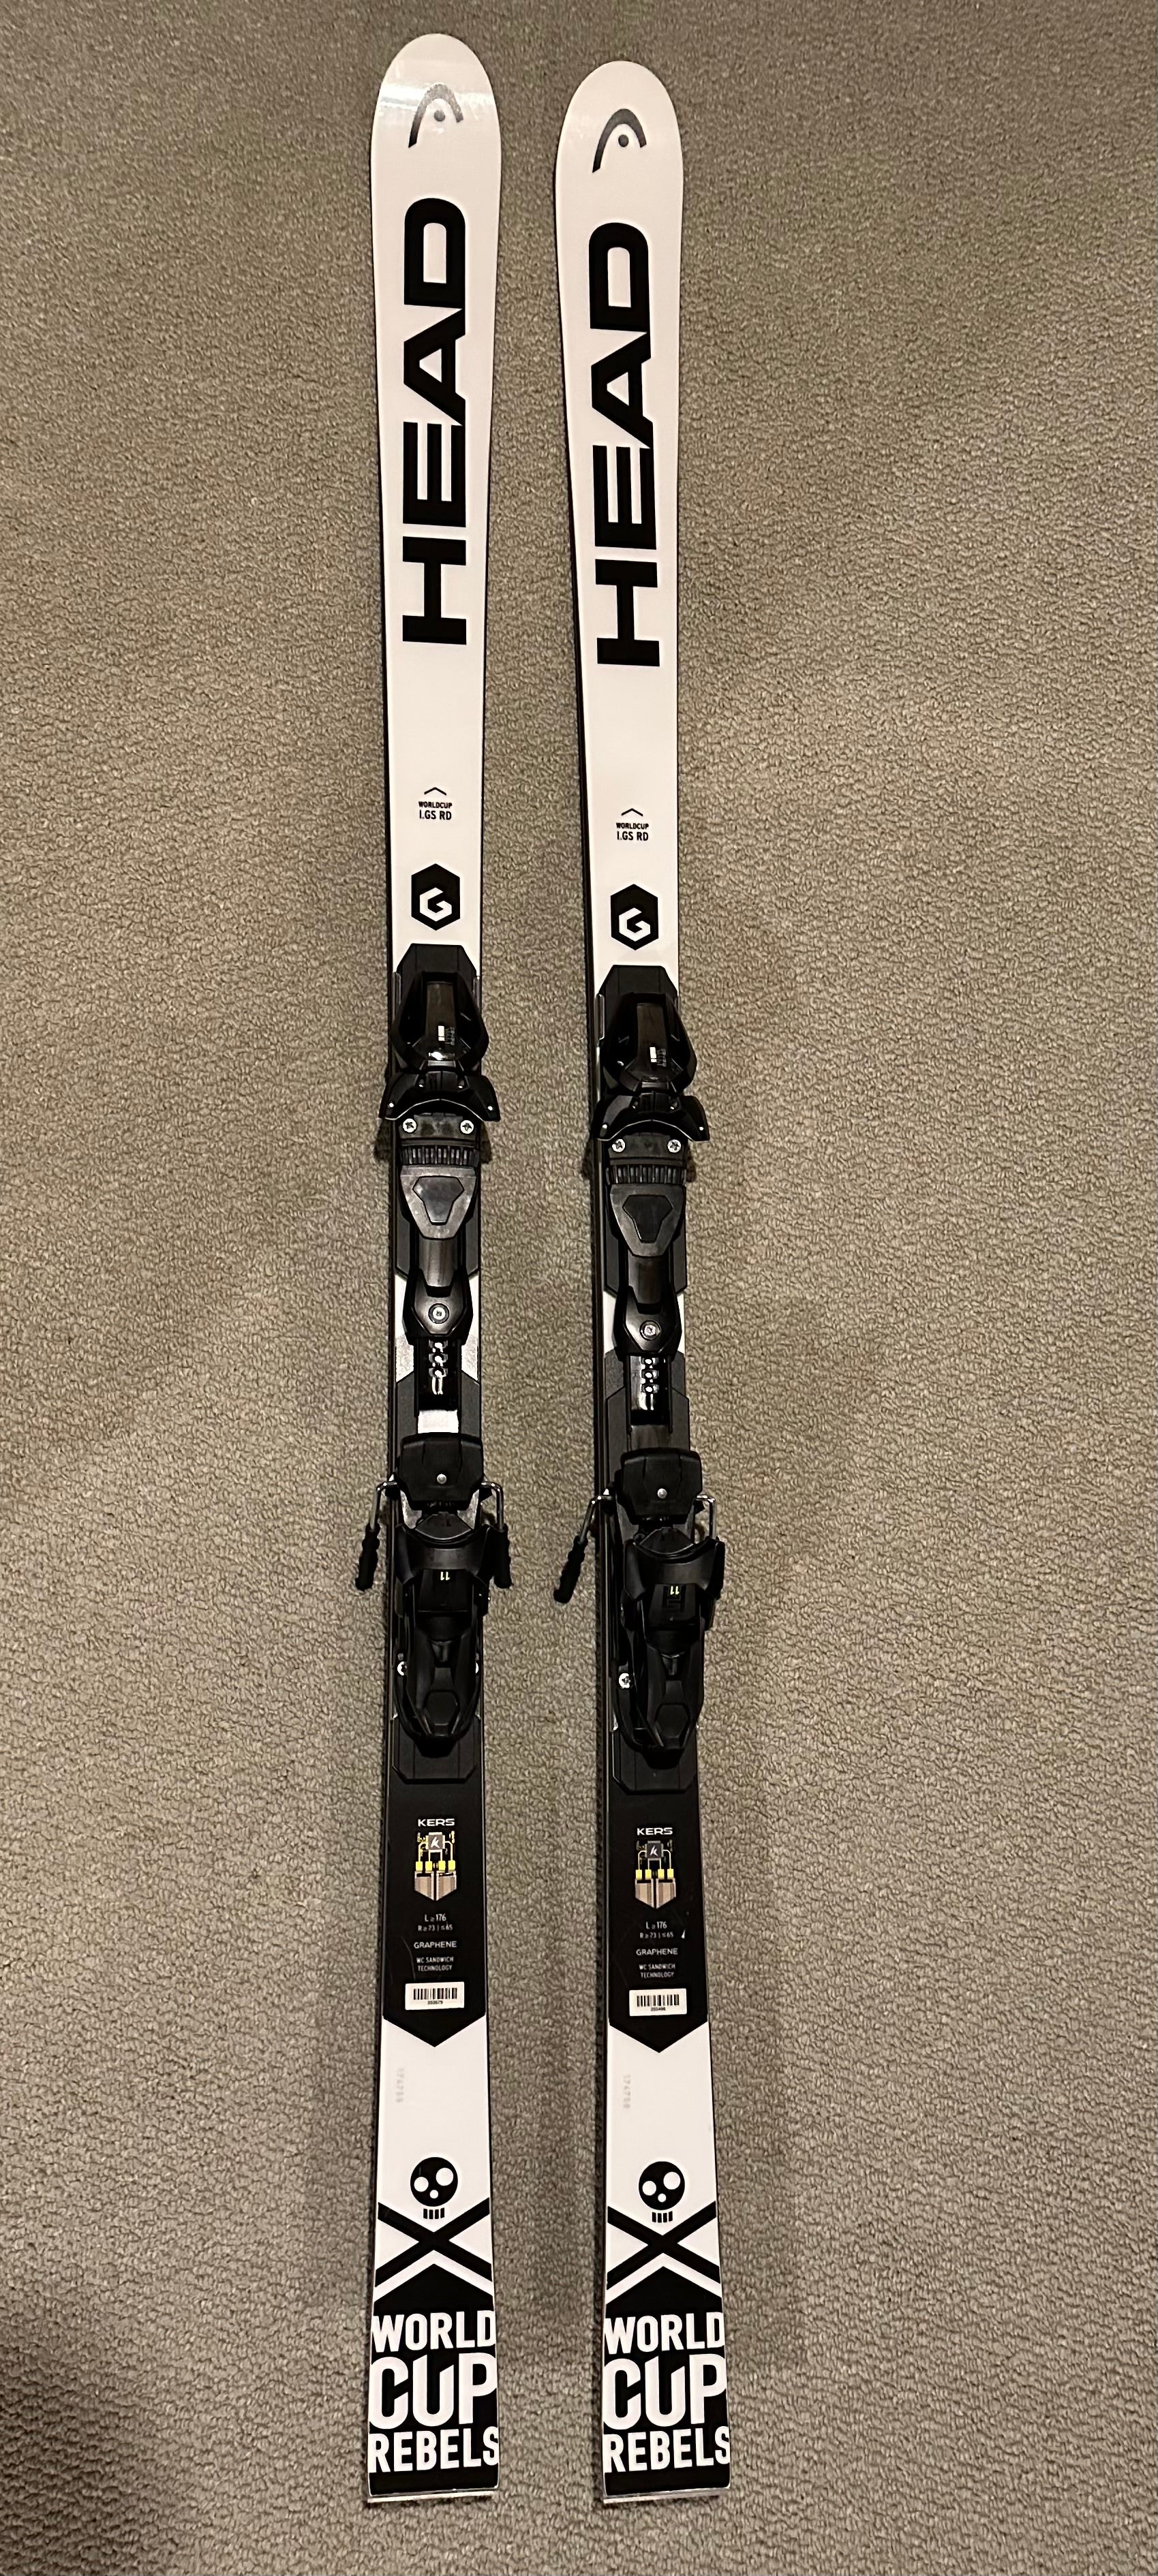 HEAD 176 cm World Cup Rebels i.GS RD Skis | SidelineSwap